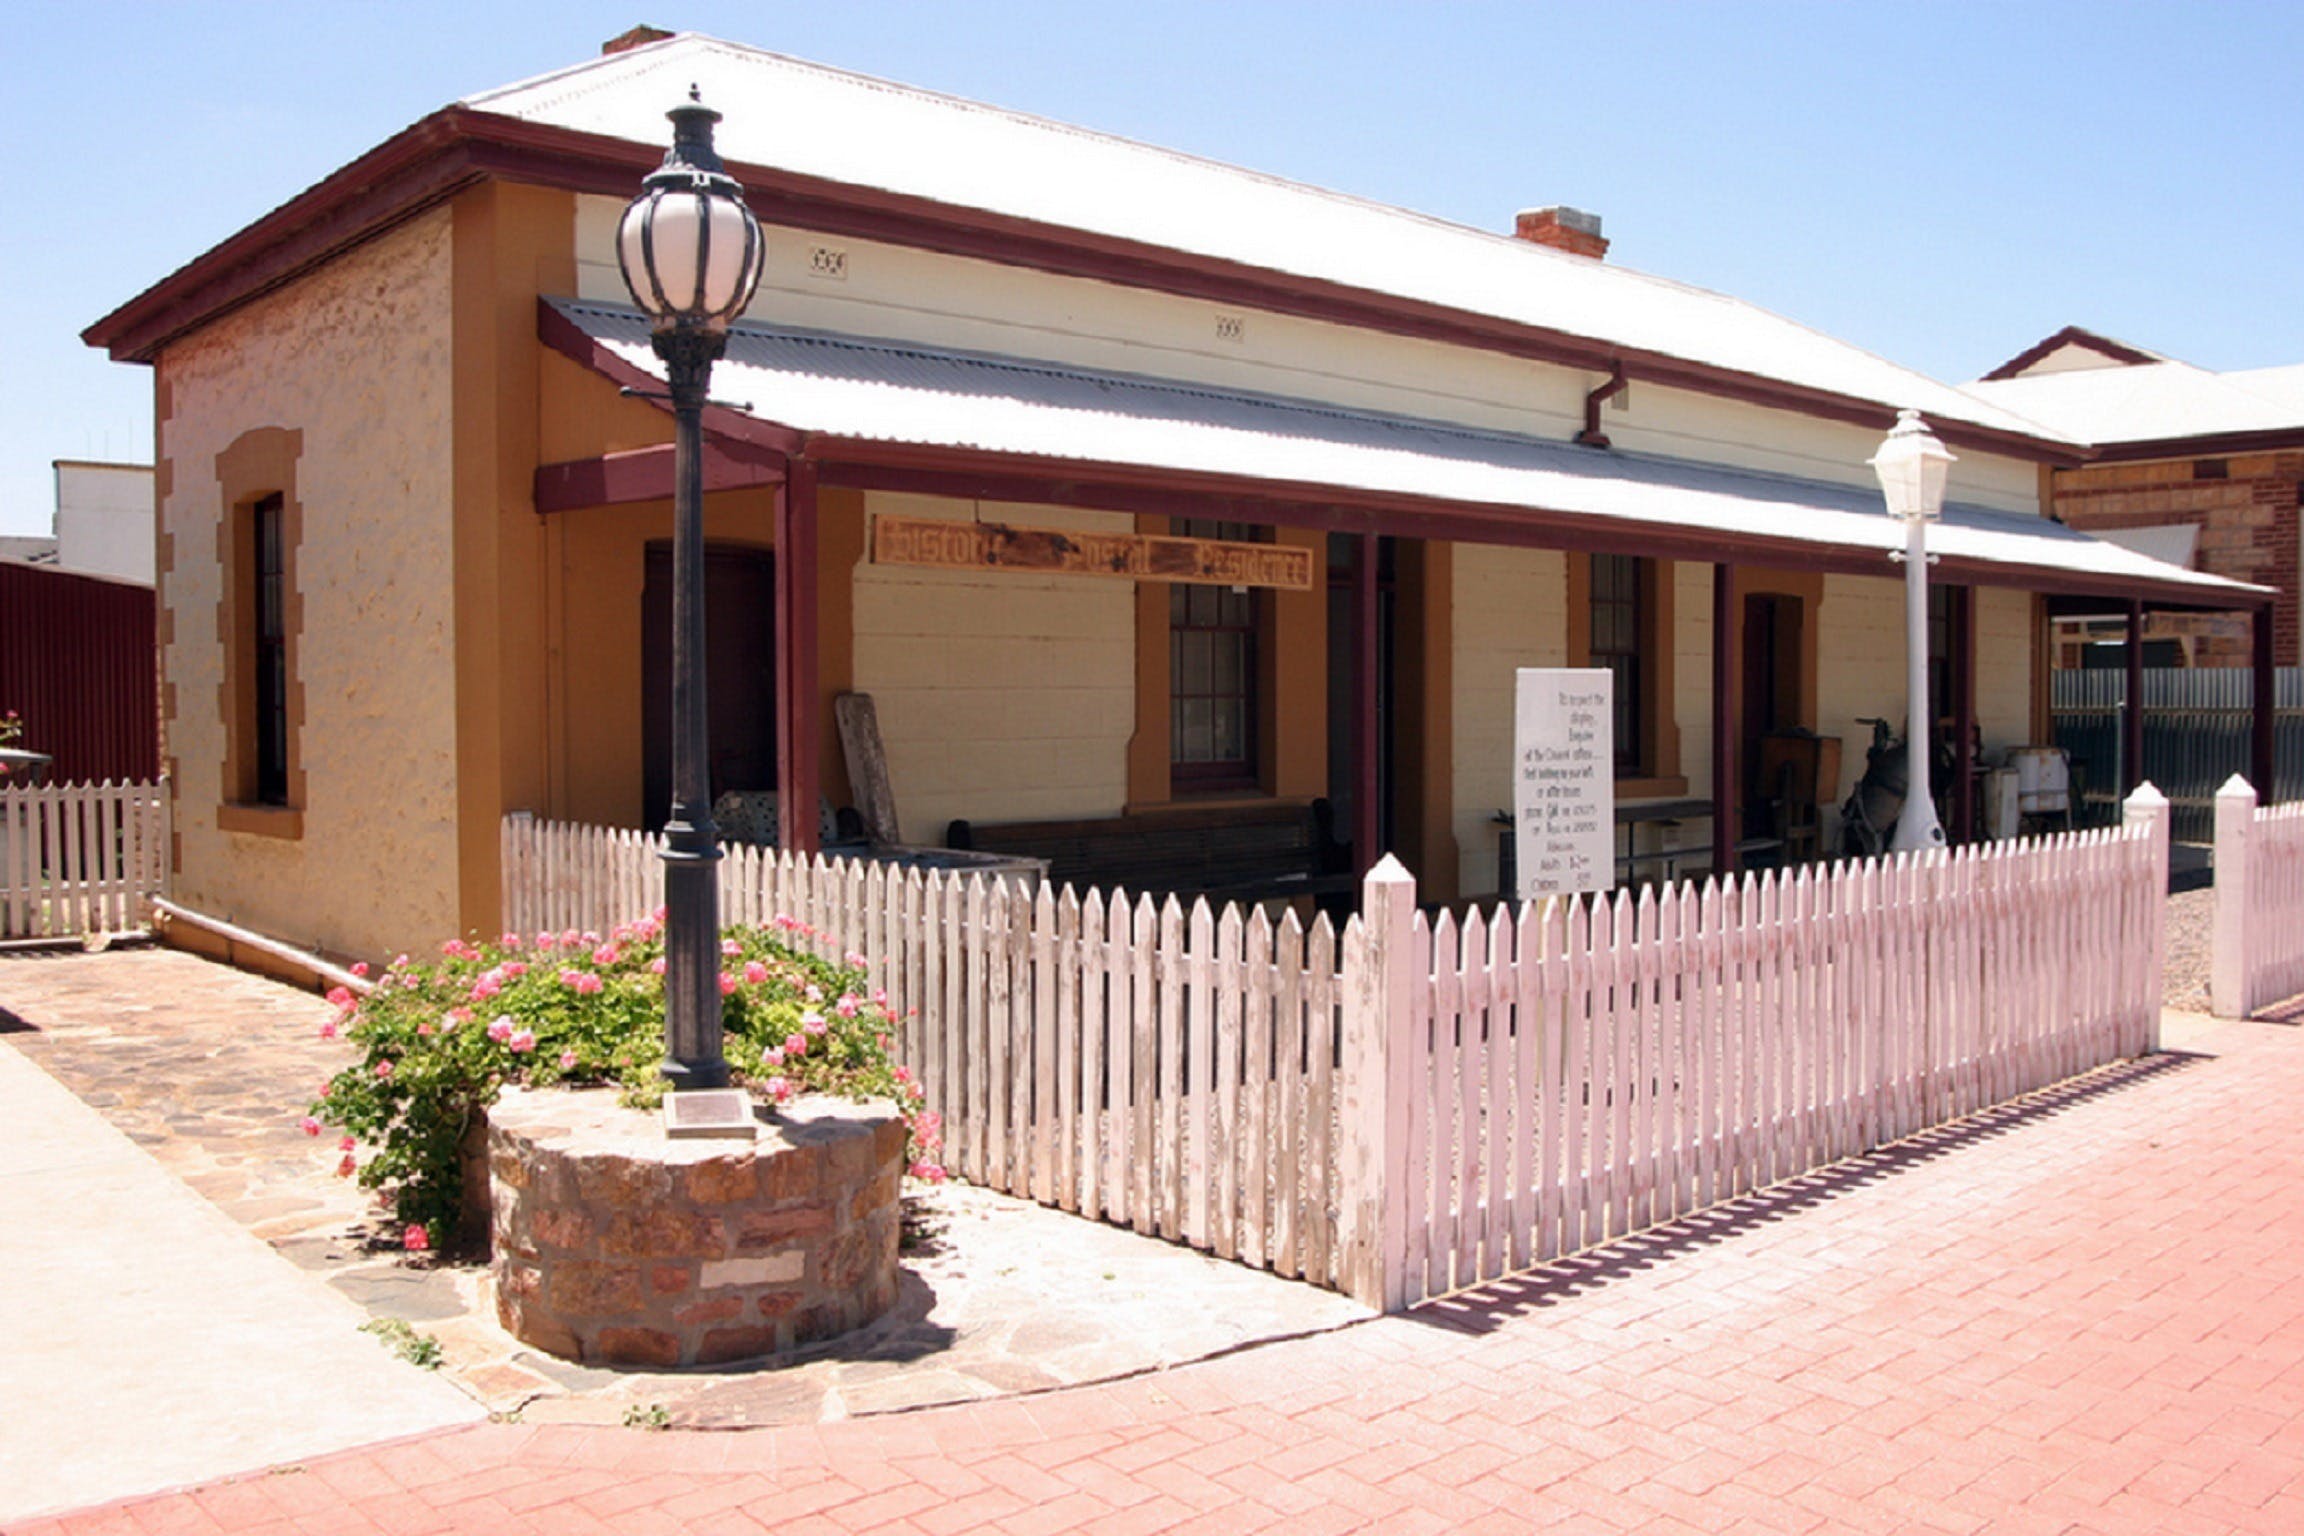 Franklin Harbour Historical Museum - Accommodation Mermaid Beach